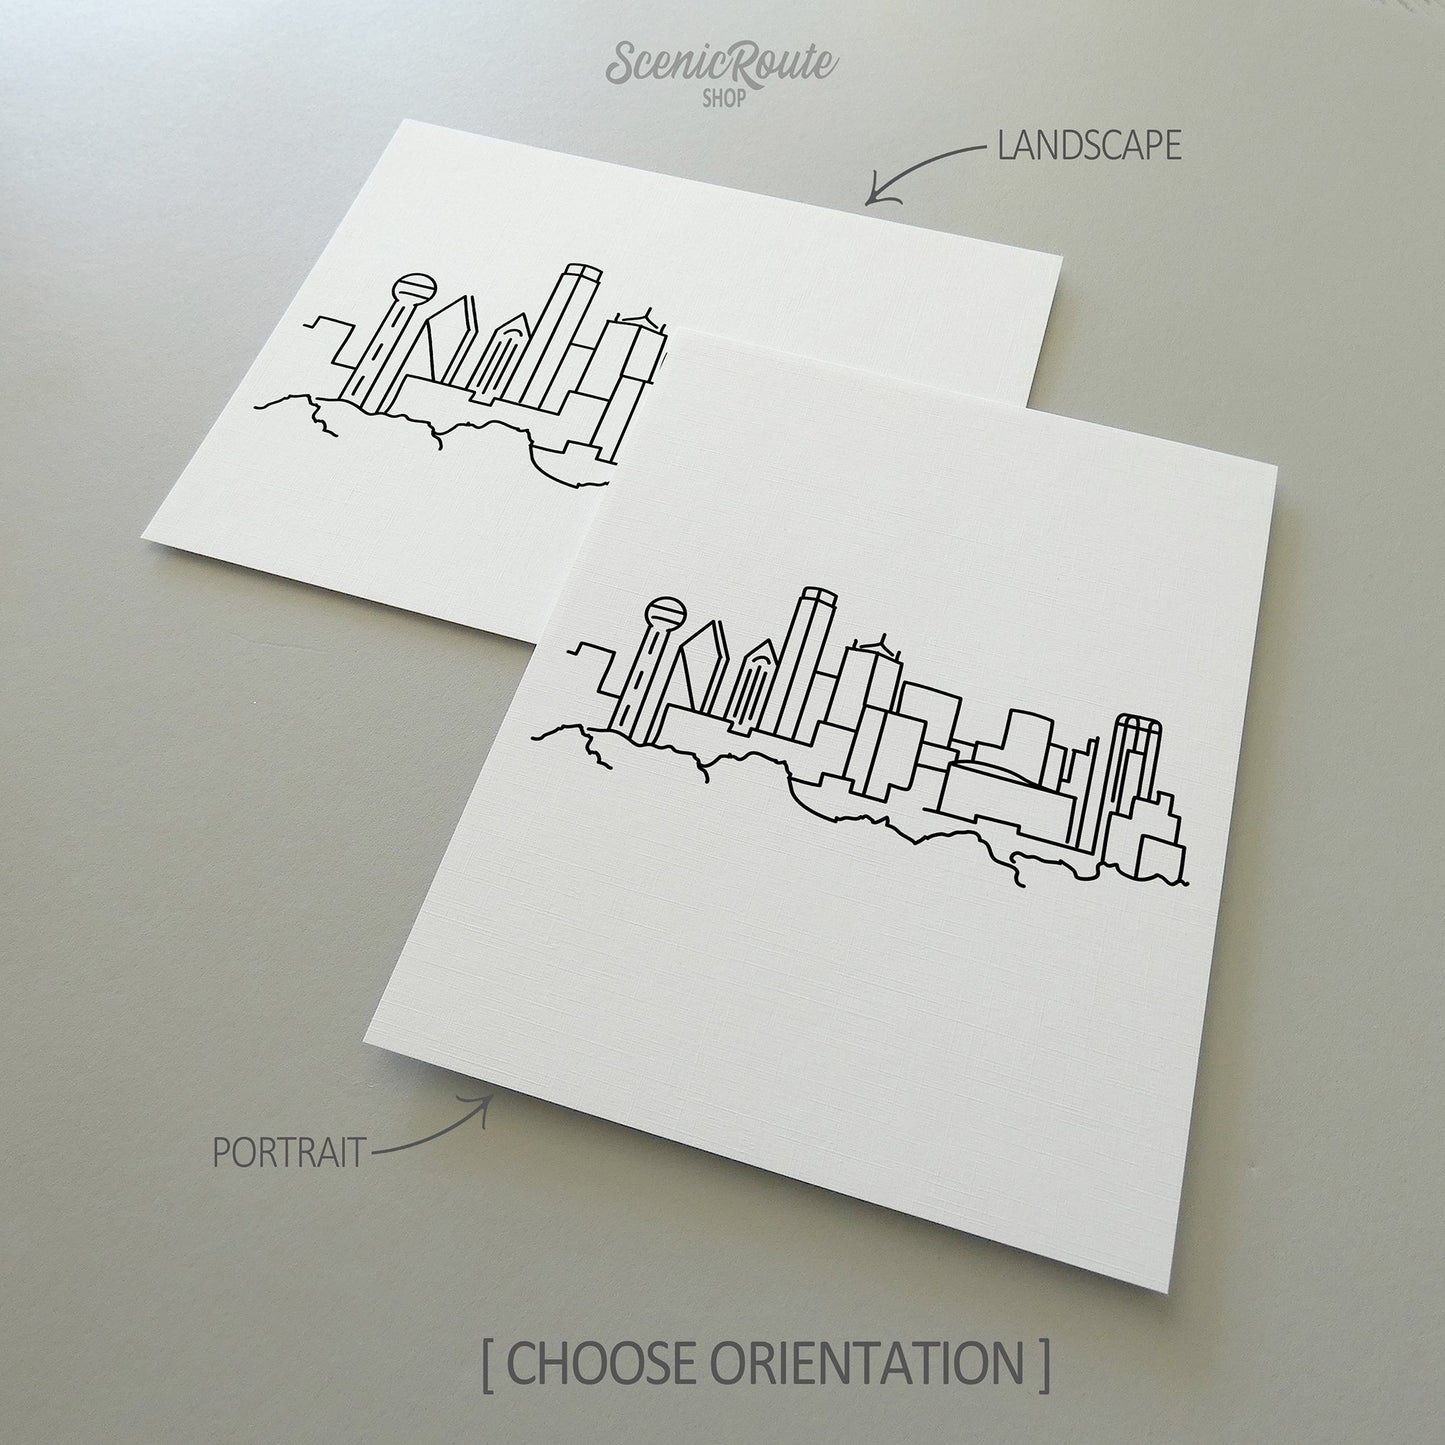 Two line art drawings of the Dallas Skyline on white linen paper with a gray background.  The pieces are shown in portrait and landscape orientation for the available art print options.